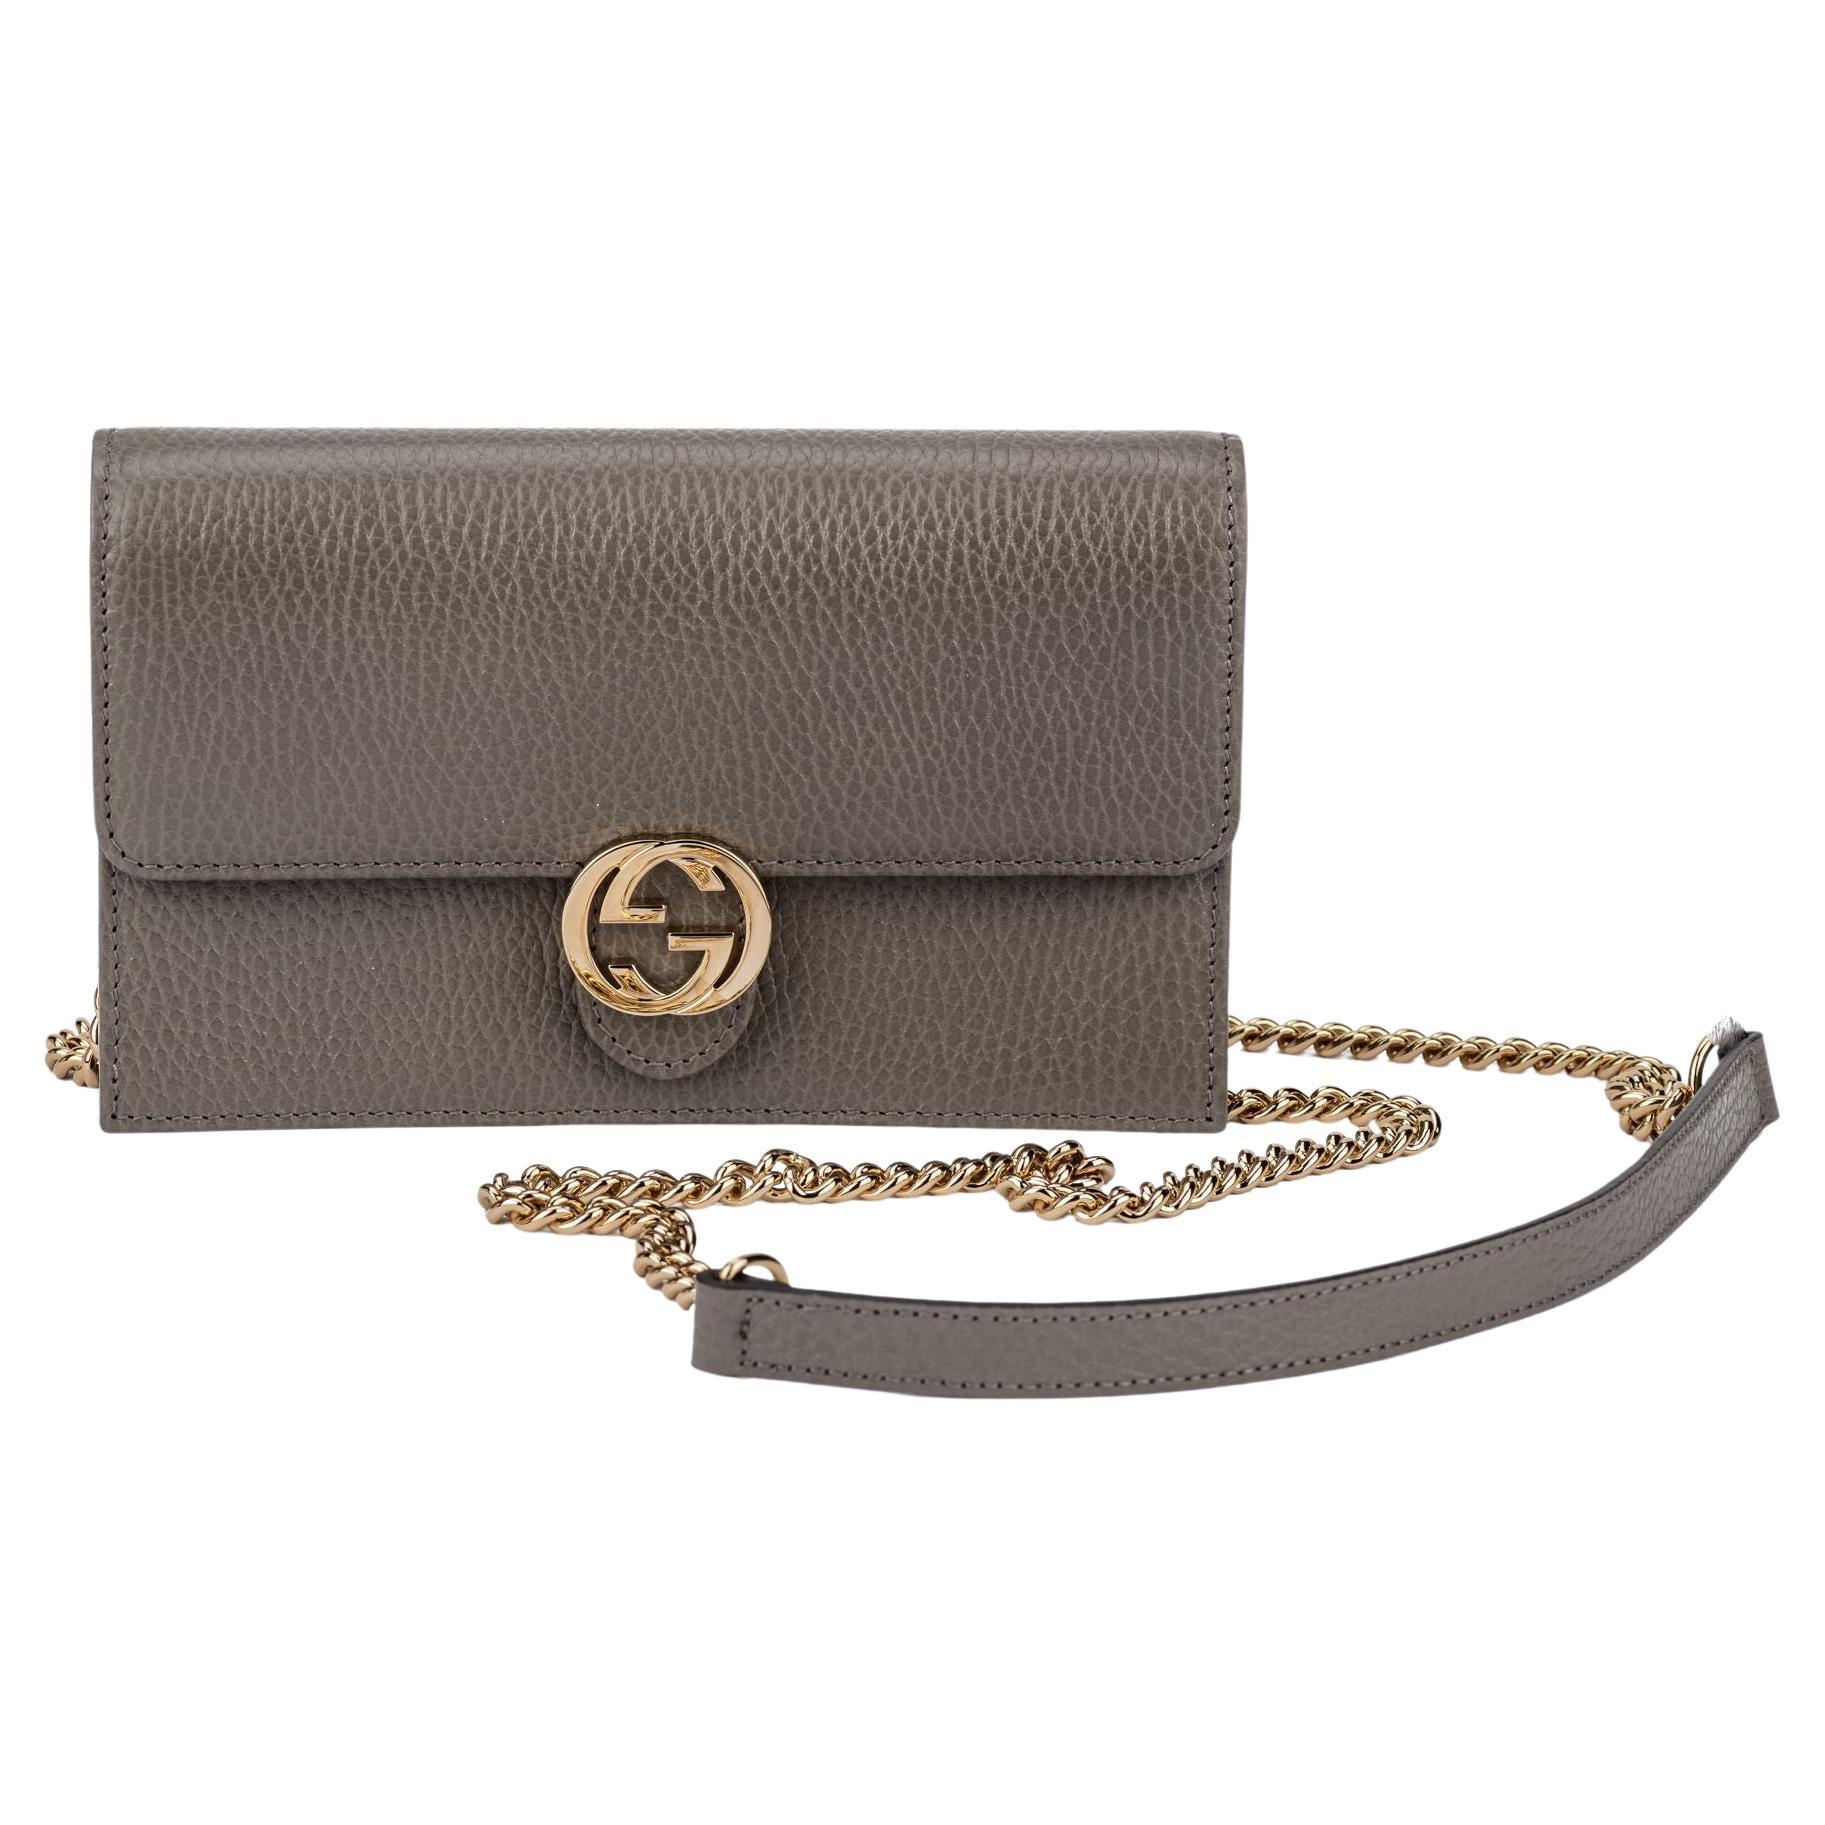 Gucci New Grey Leather Clutch/Crossbody For Sale